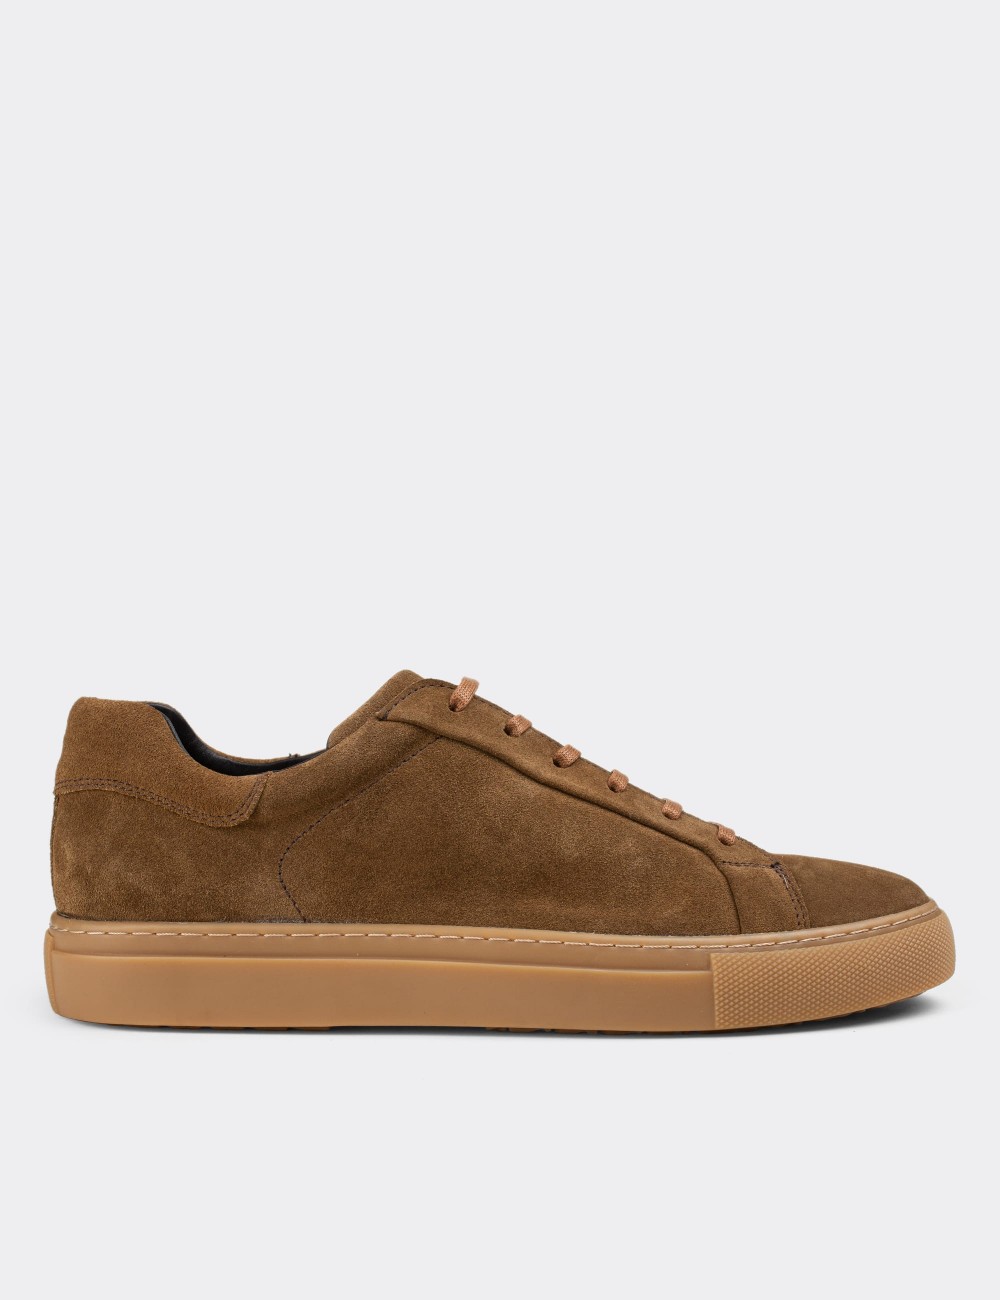 Tan Suede Leather Sneakers - 01829MTBAC01